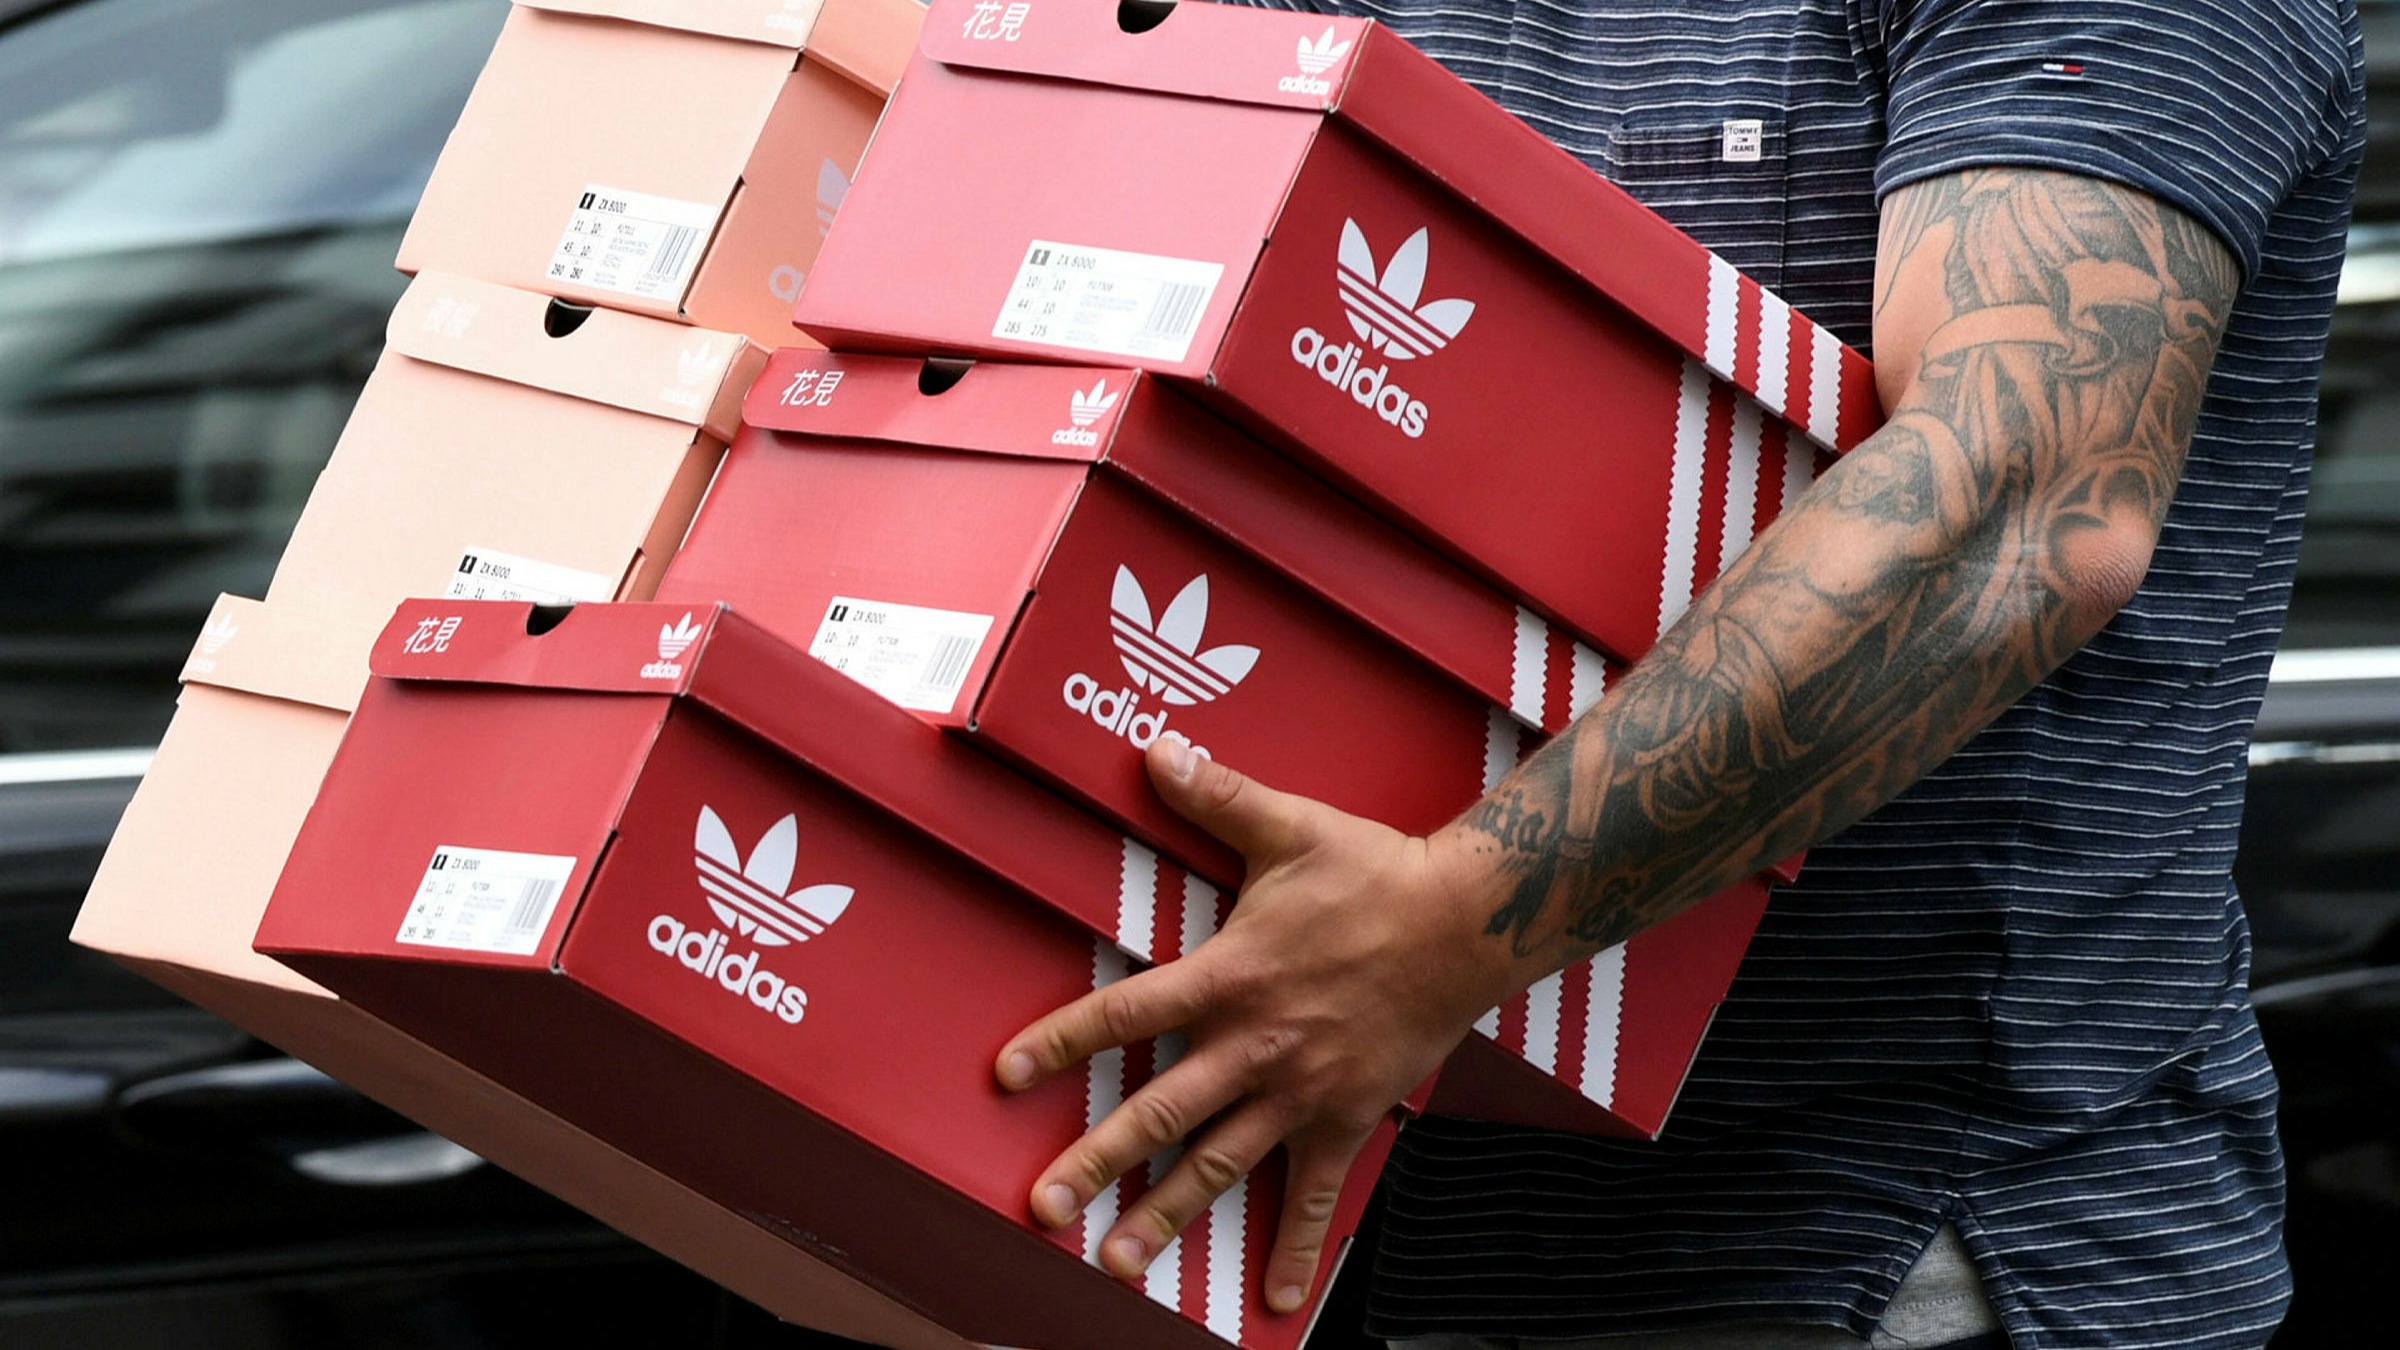 Pandemic supply chain problems could cost Adidas €500m in this year | Financial Times